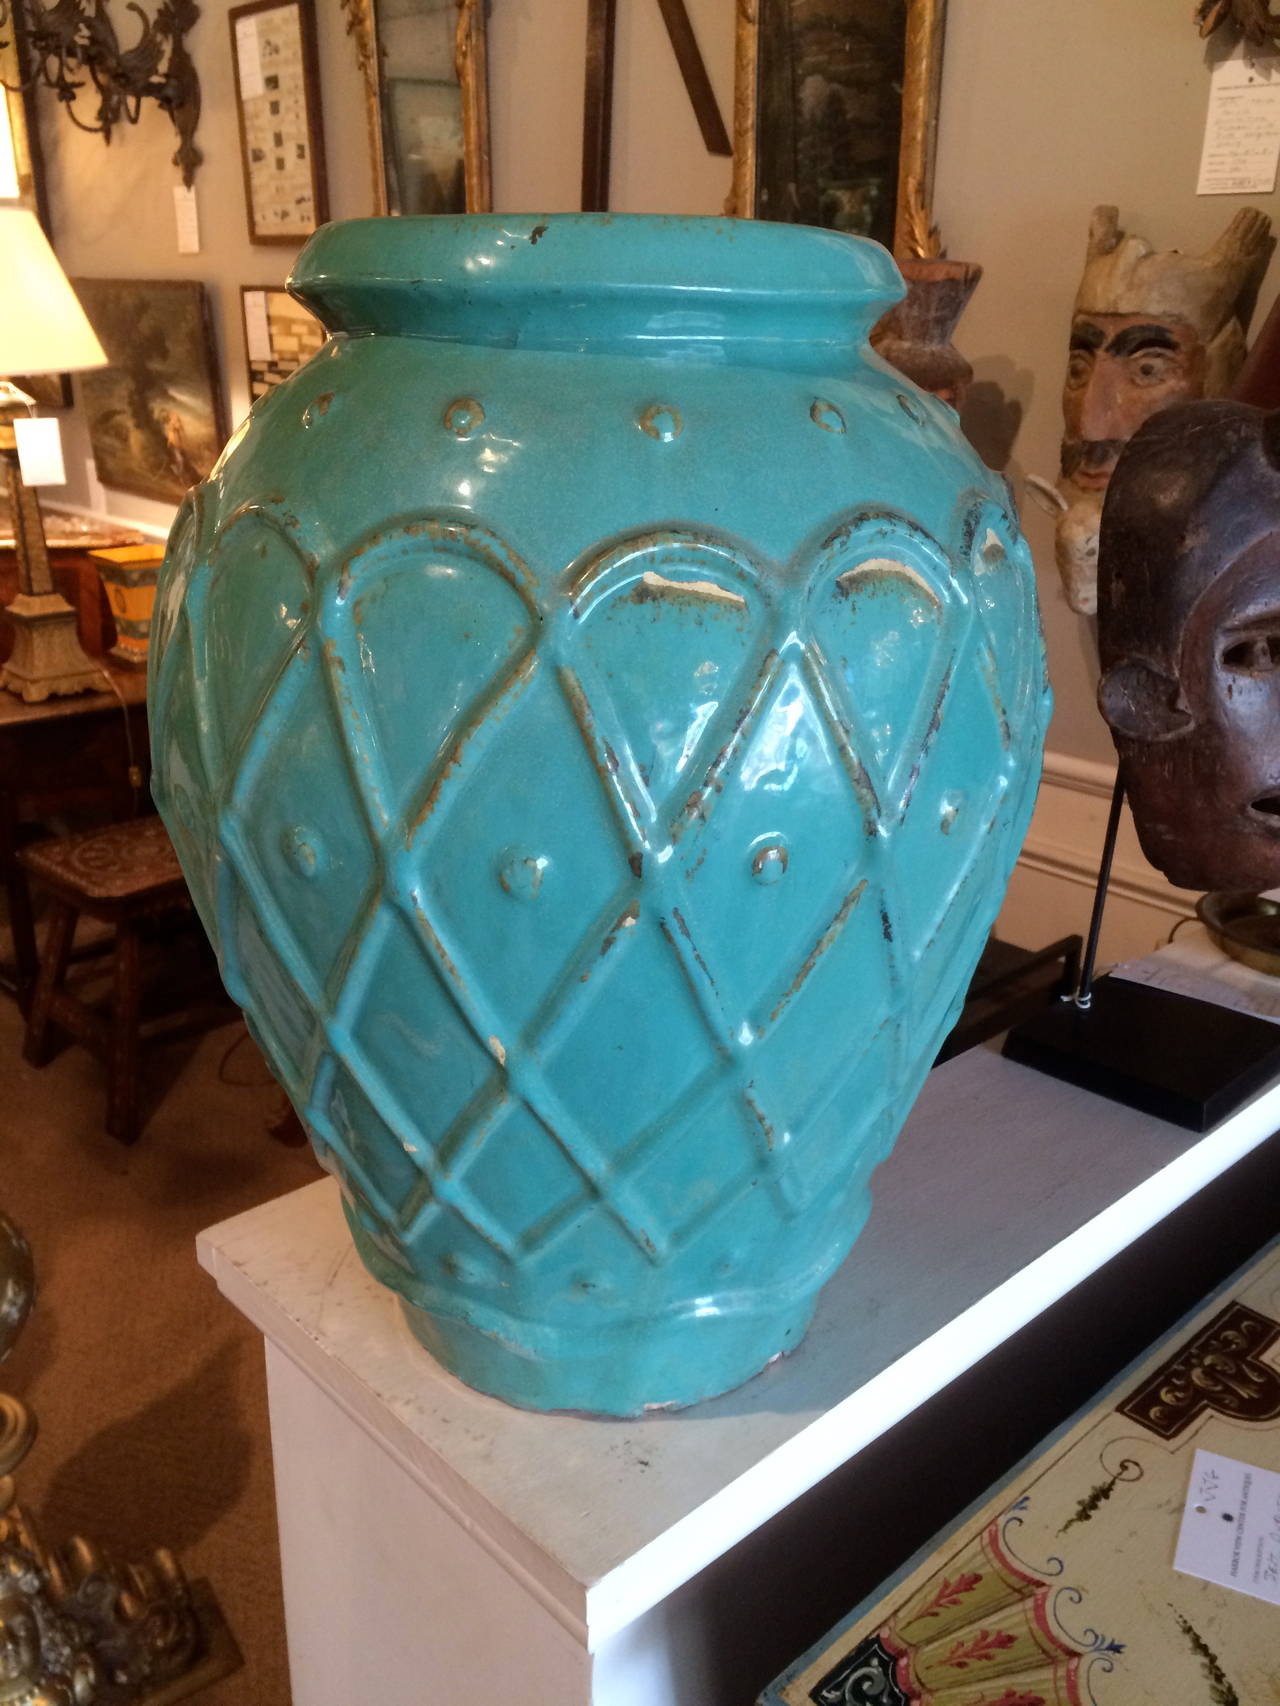 A fine large-scale turquoise glazed art pottery jar by Galloway Terracotta Co., Philadelphia. With raised cross hatched pattern and iridescent highlights to the glaze. Stamped Galloway mark on the rim. This impressive piece has wonderful color, it's